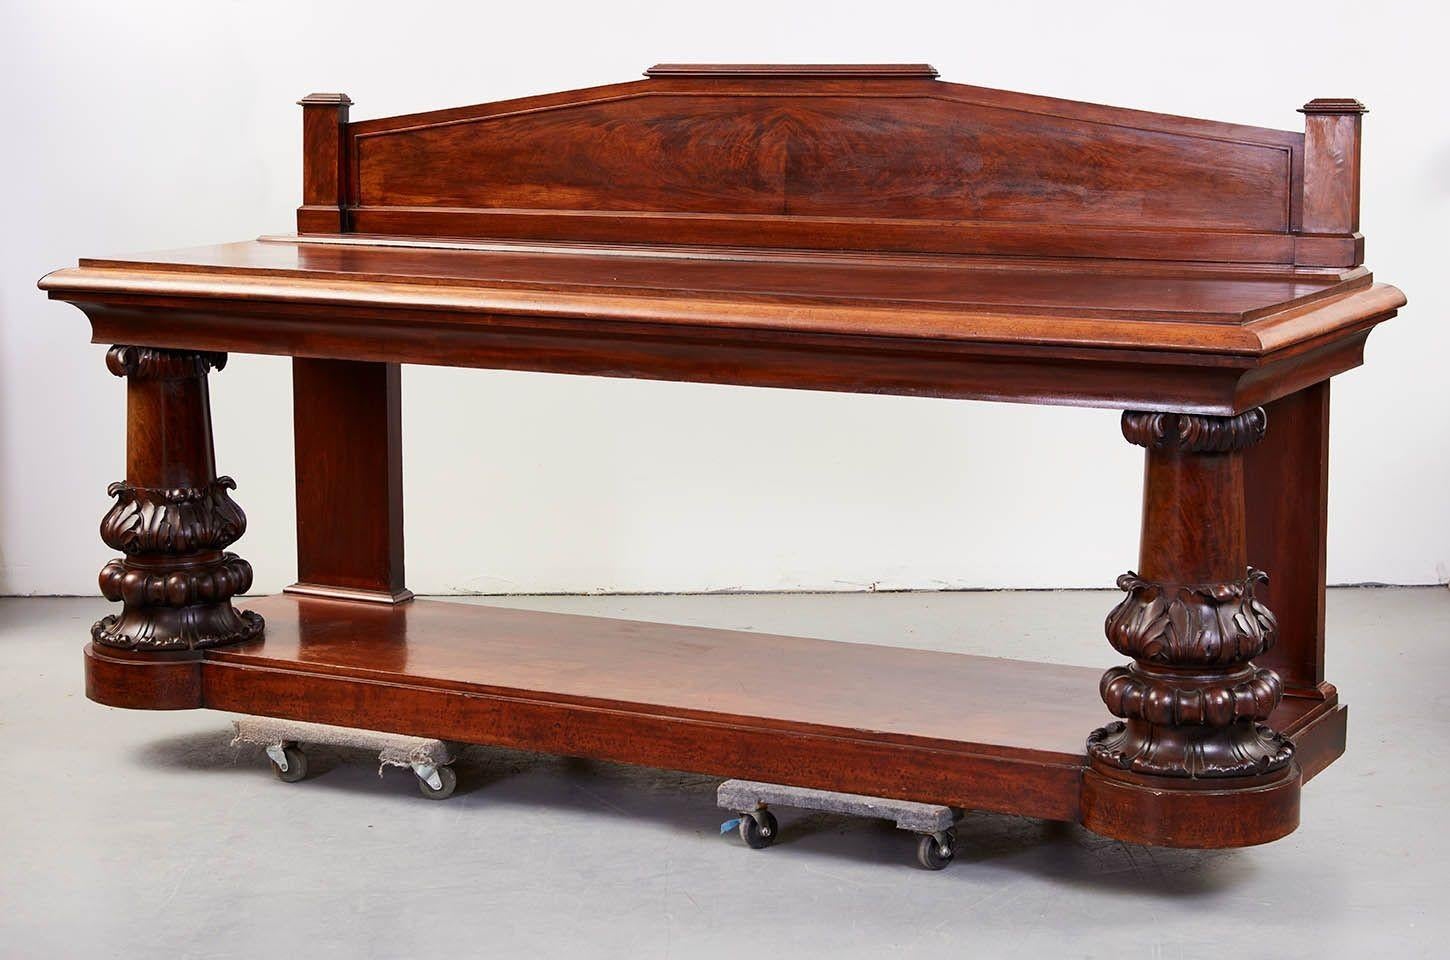 Most impressive George IV period mahogany serving/console table by the leading Dublin firm of Mack, Williams and Gibton, having arched architectural backsplash over richly patinated serving surface with plate rack (where it is conspicuously stamped